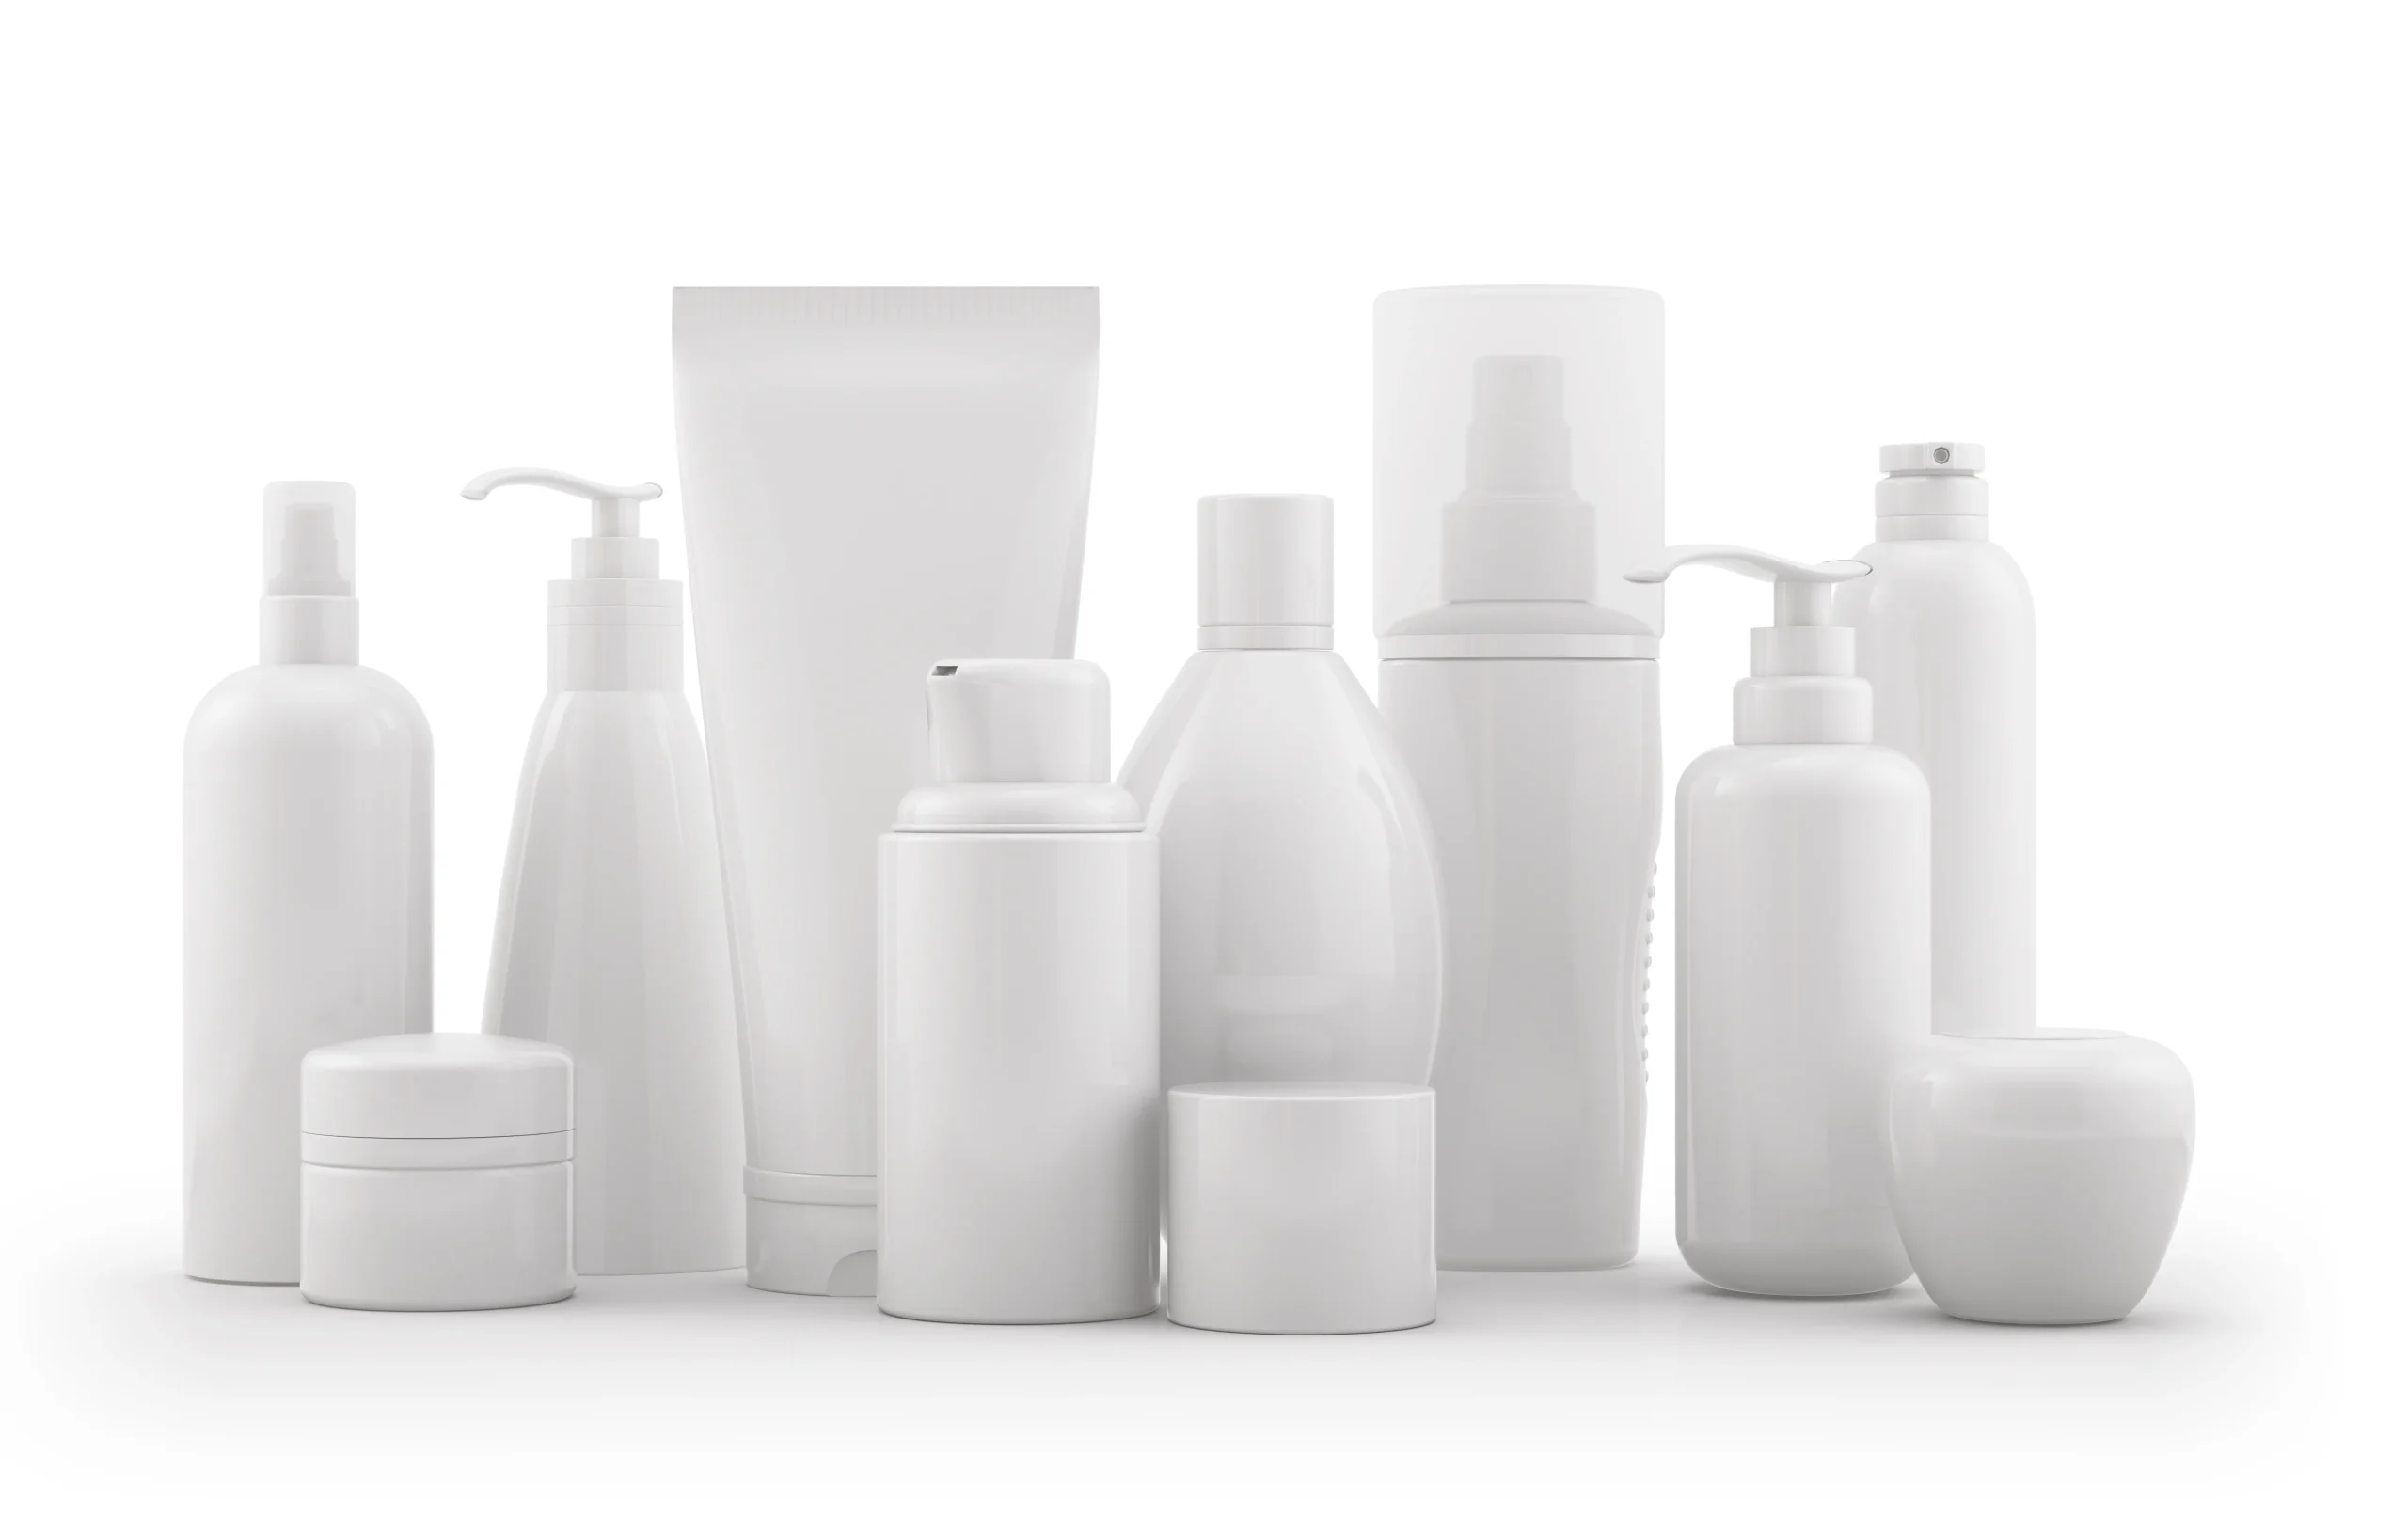 Design and Functionality of Lotion Bottles